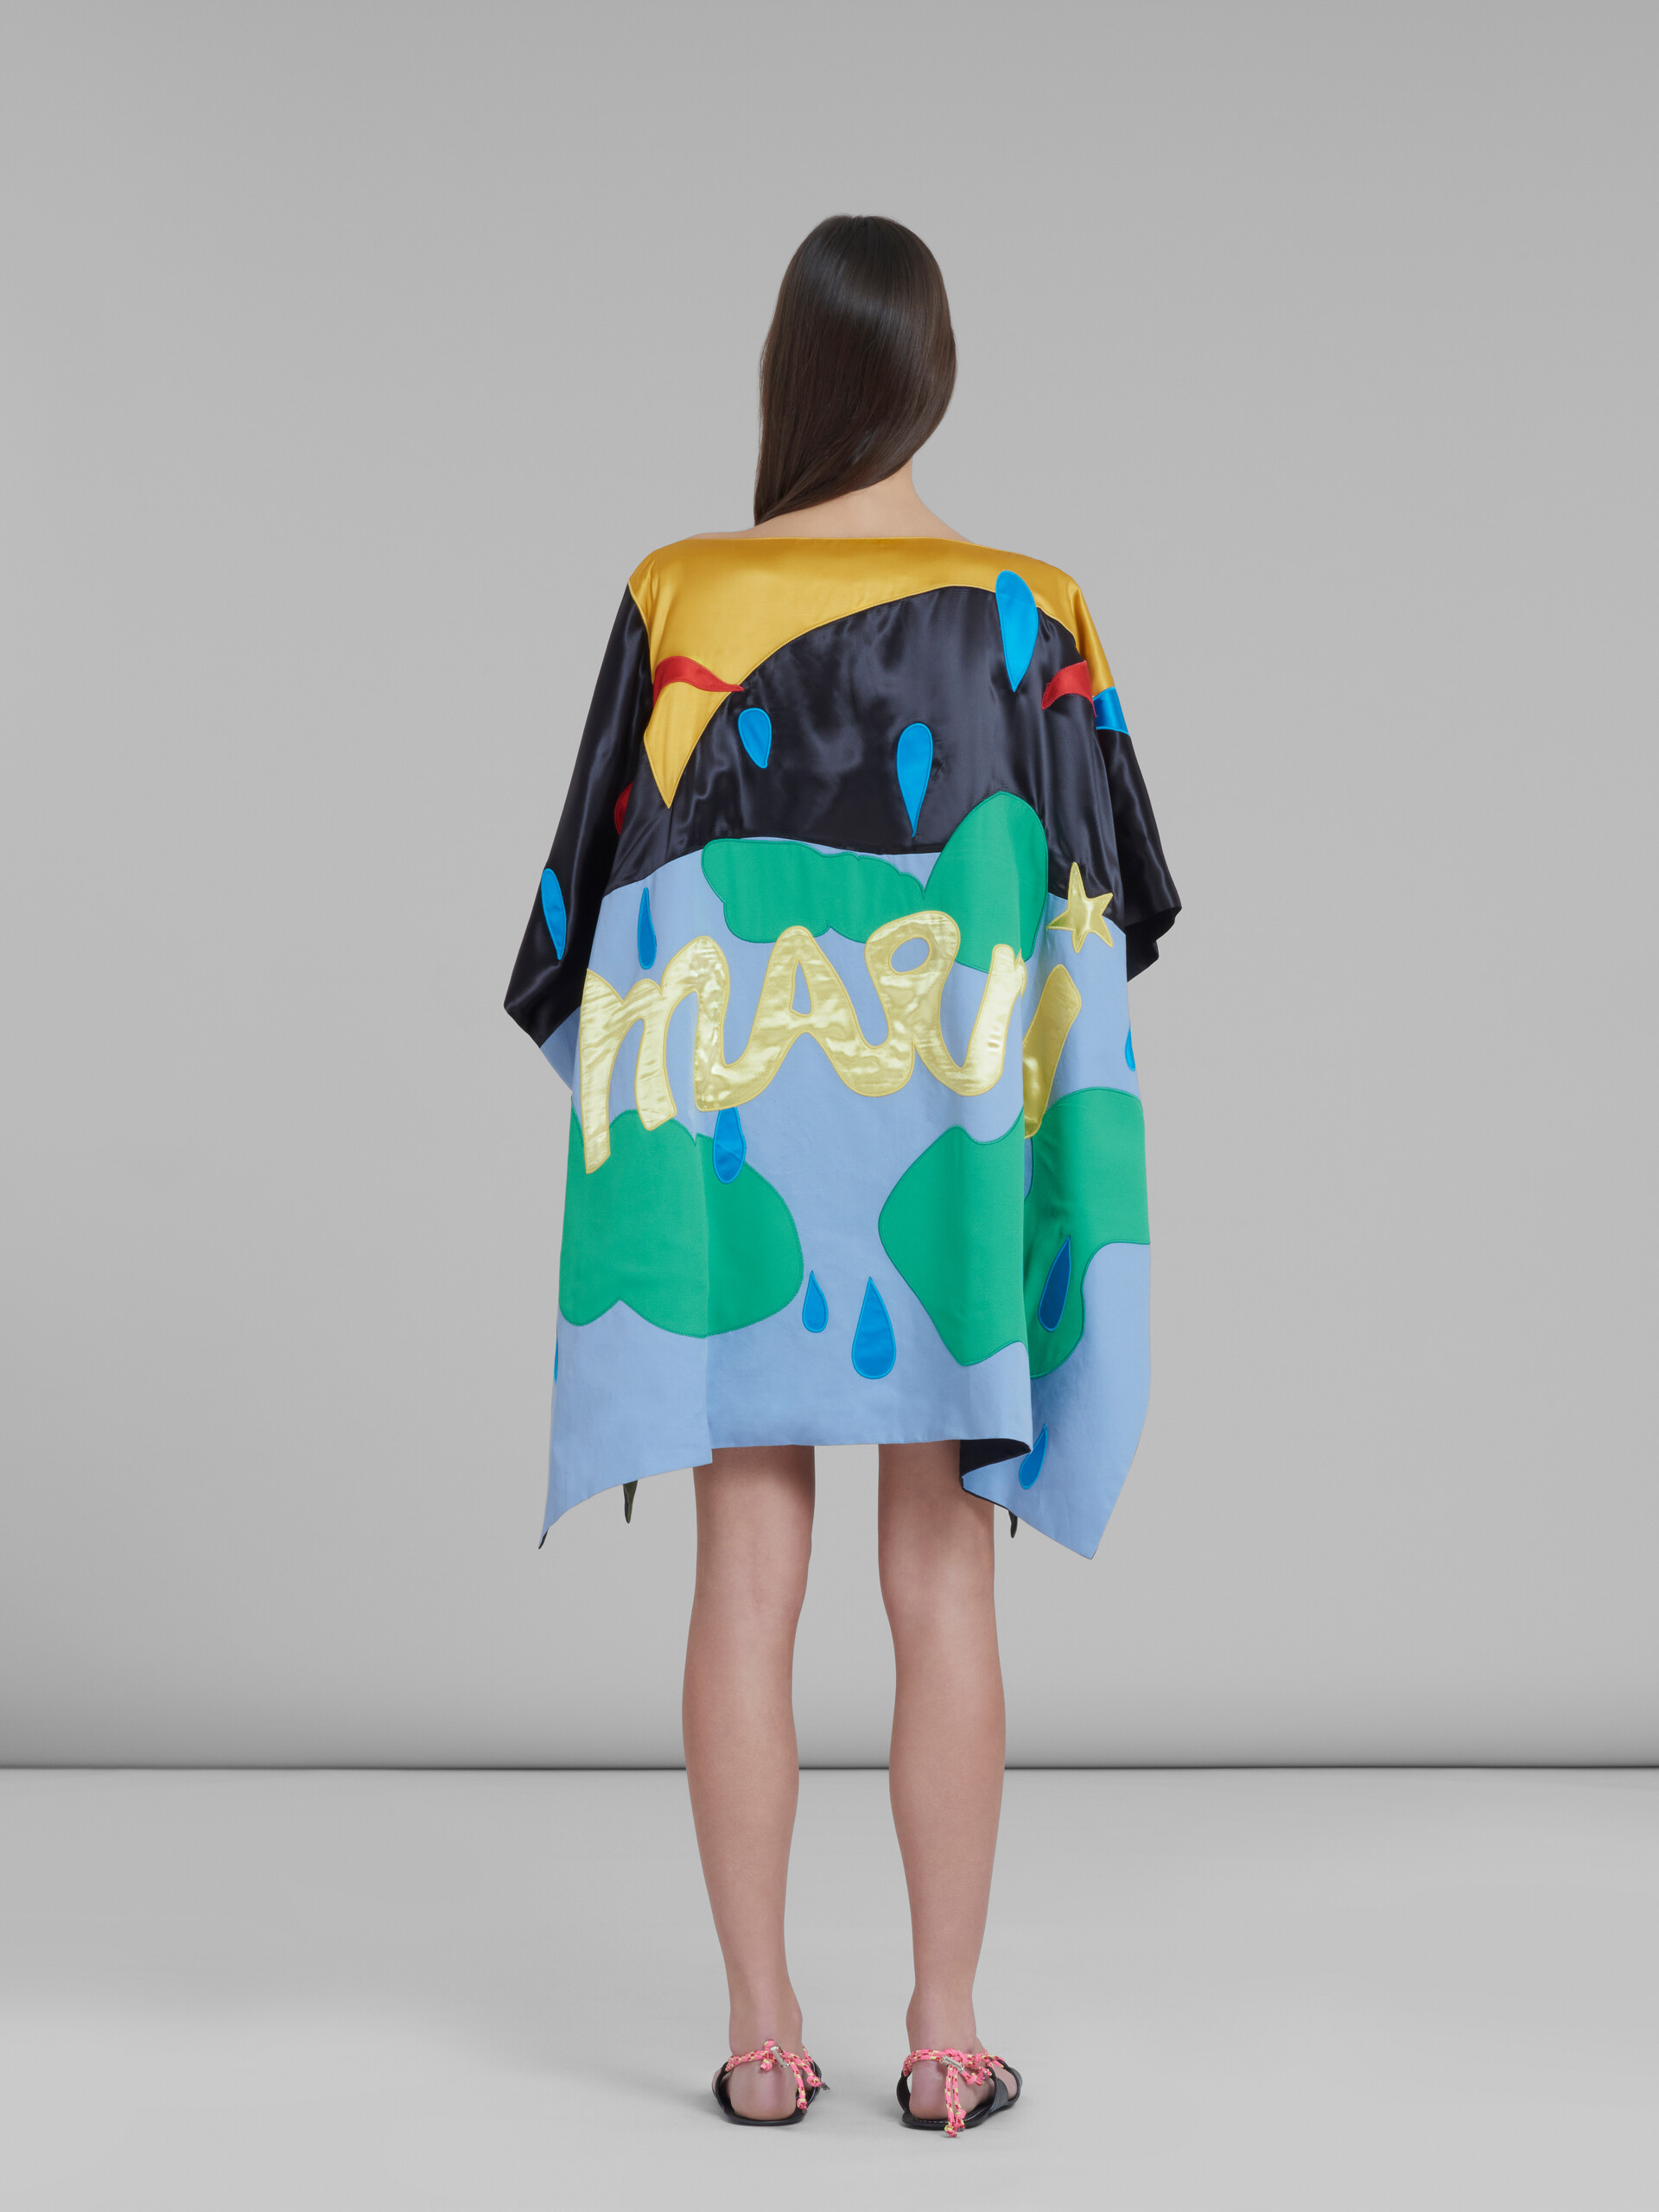 Marni x No Vacancy Inn - Cape top with multicolour patchwork motifs - Shirts - Image 3